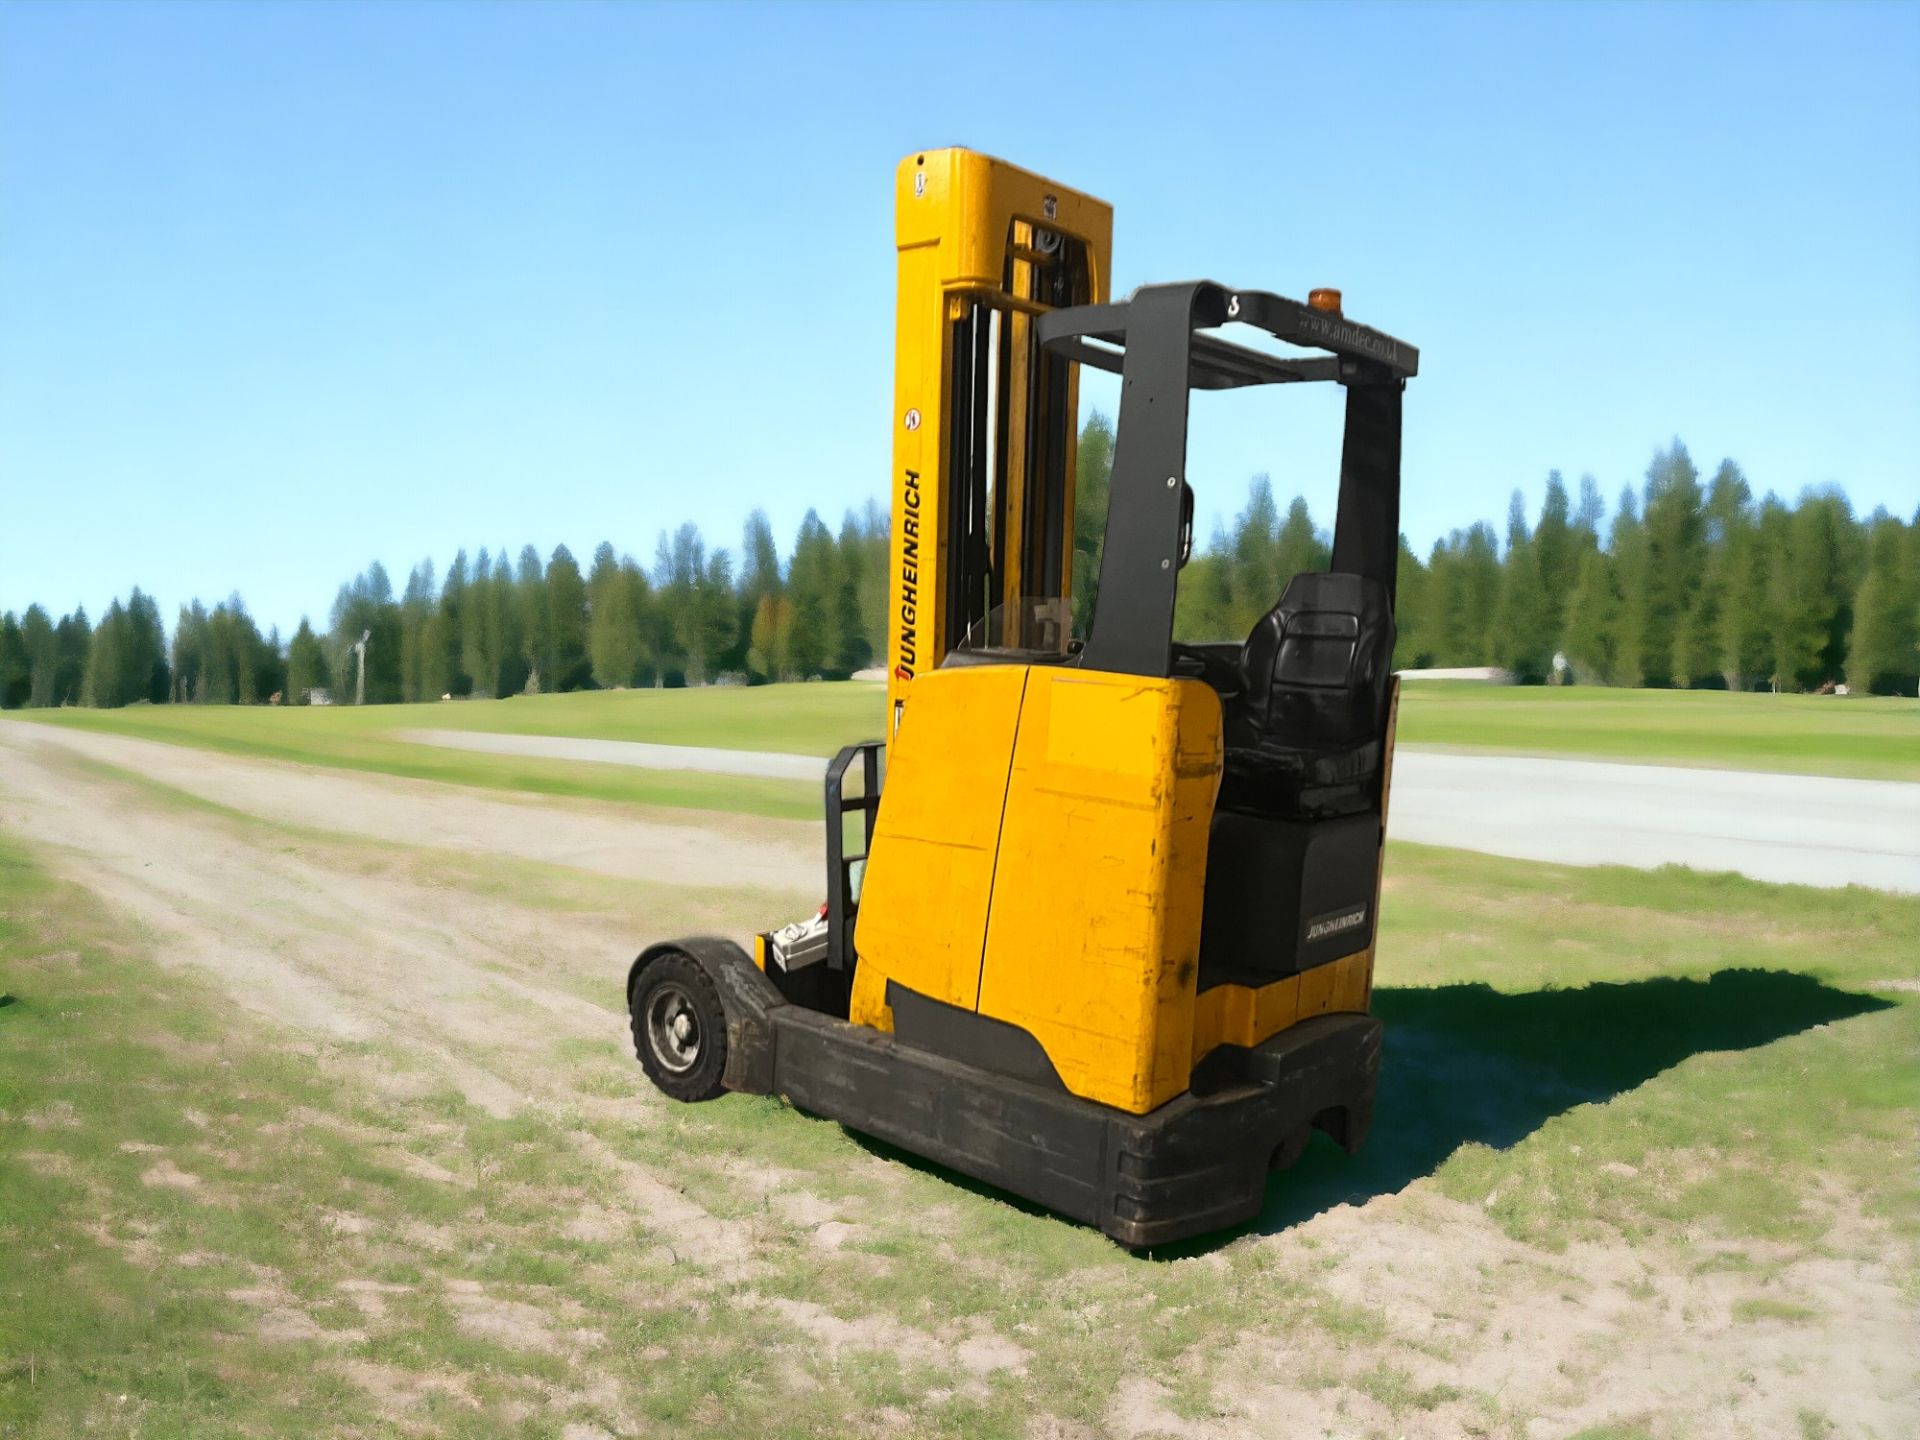 JUNGHEINRICH REACH TRUCK ETVC 16: POWERFUL ELECTRIC WORKHORSE WITH LOW HOURS **(INCLUDES CHARGER)** - Image 4 of 6